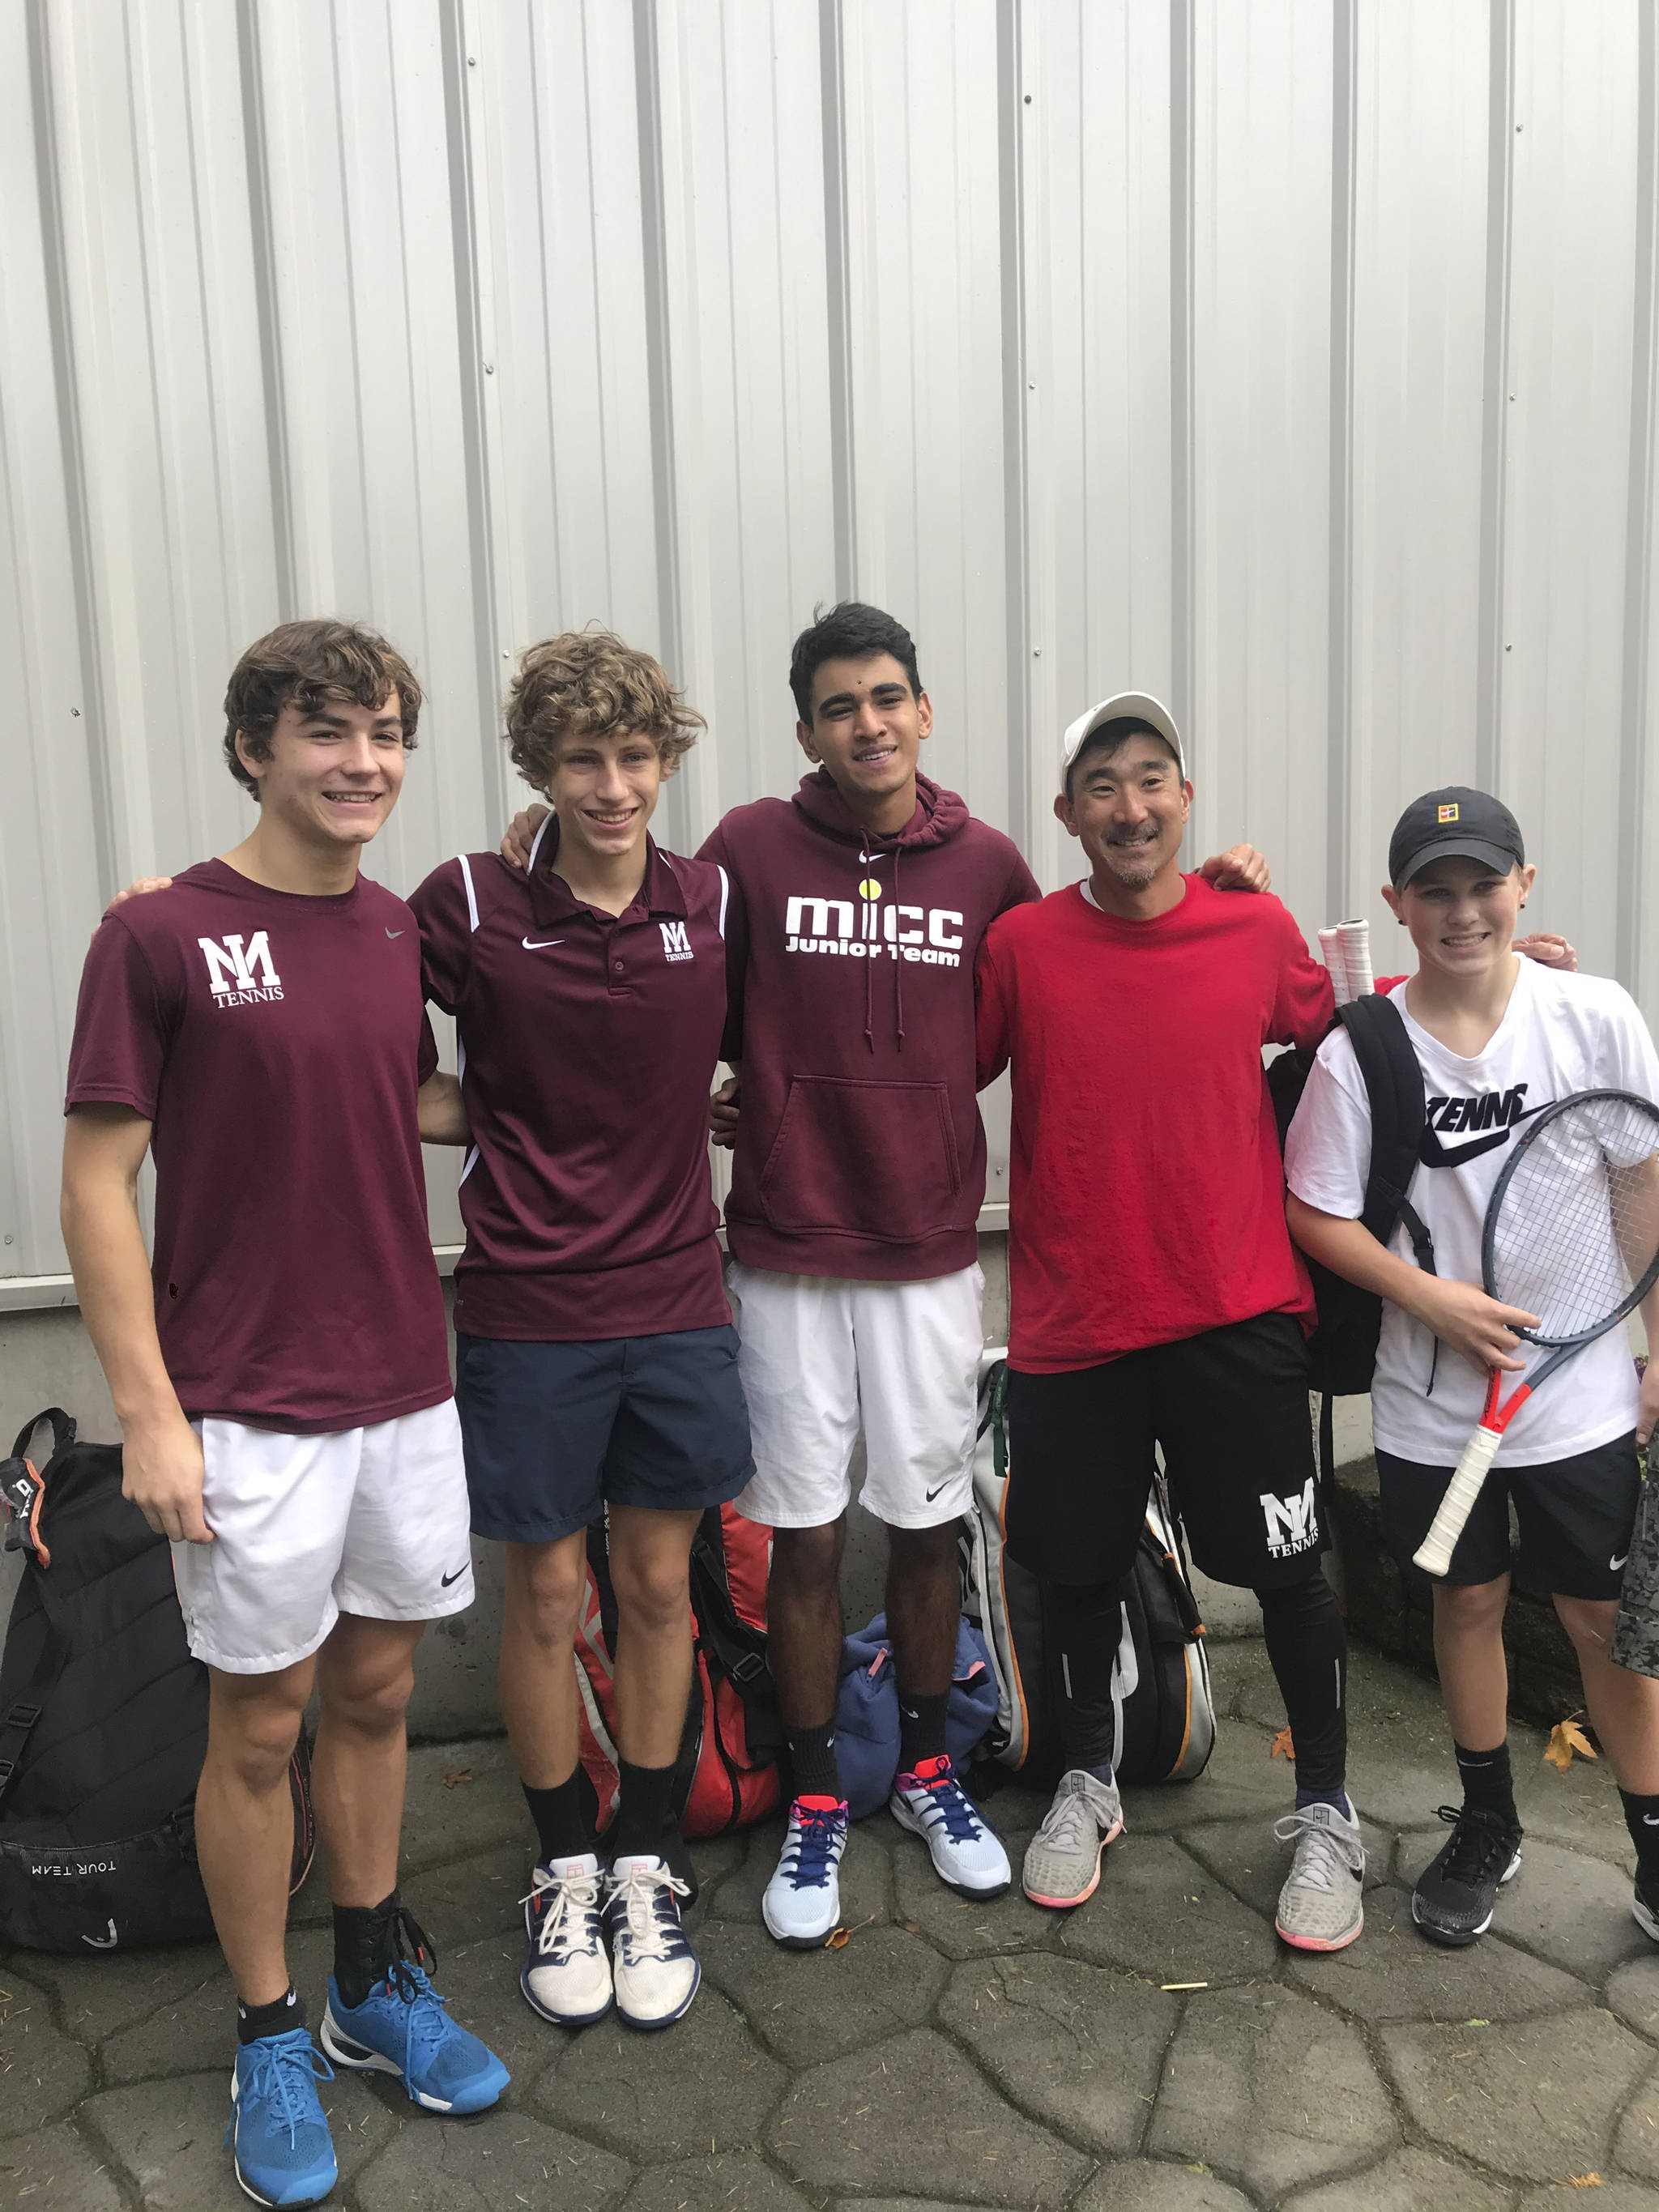 Members of the Mercer Island boys tennis team, (from left) Jack Mattox, Andrew Kaelin, Alex Patel, head coach Ryan Pang and Brock Anderson, gather at the 3A KingCo league tournament. Photo courtesy of Steve Mattox